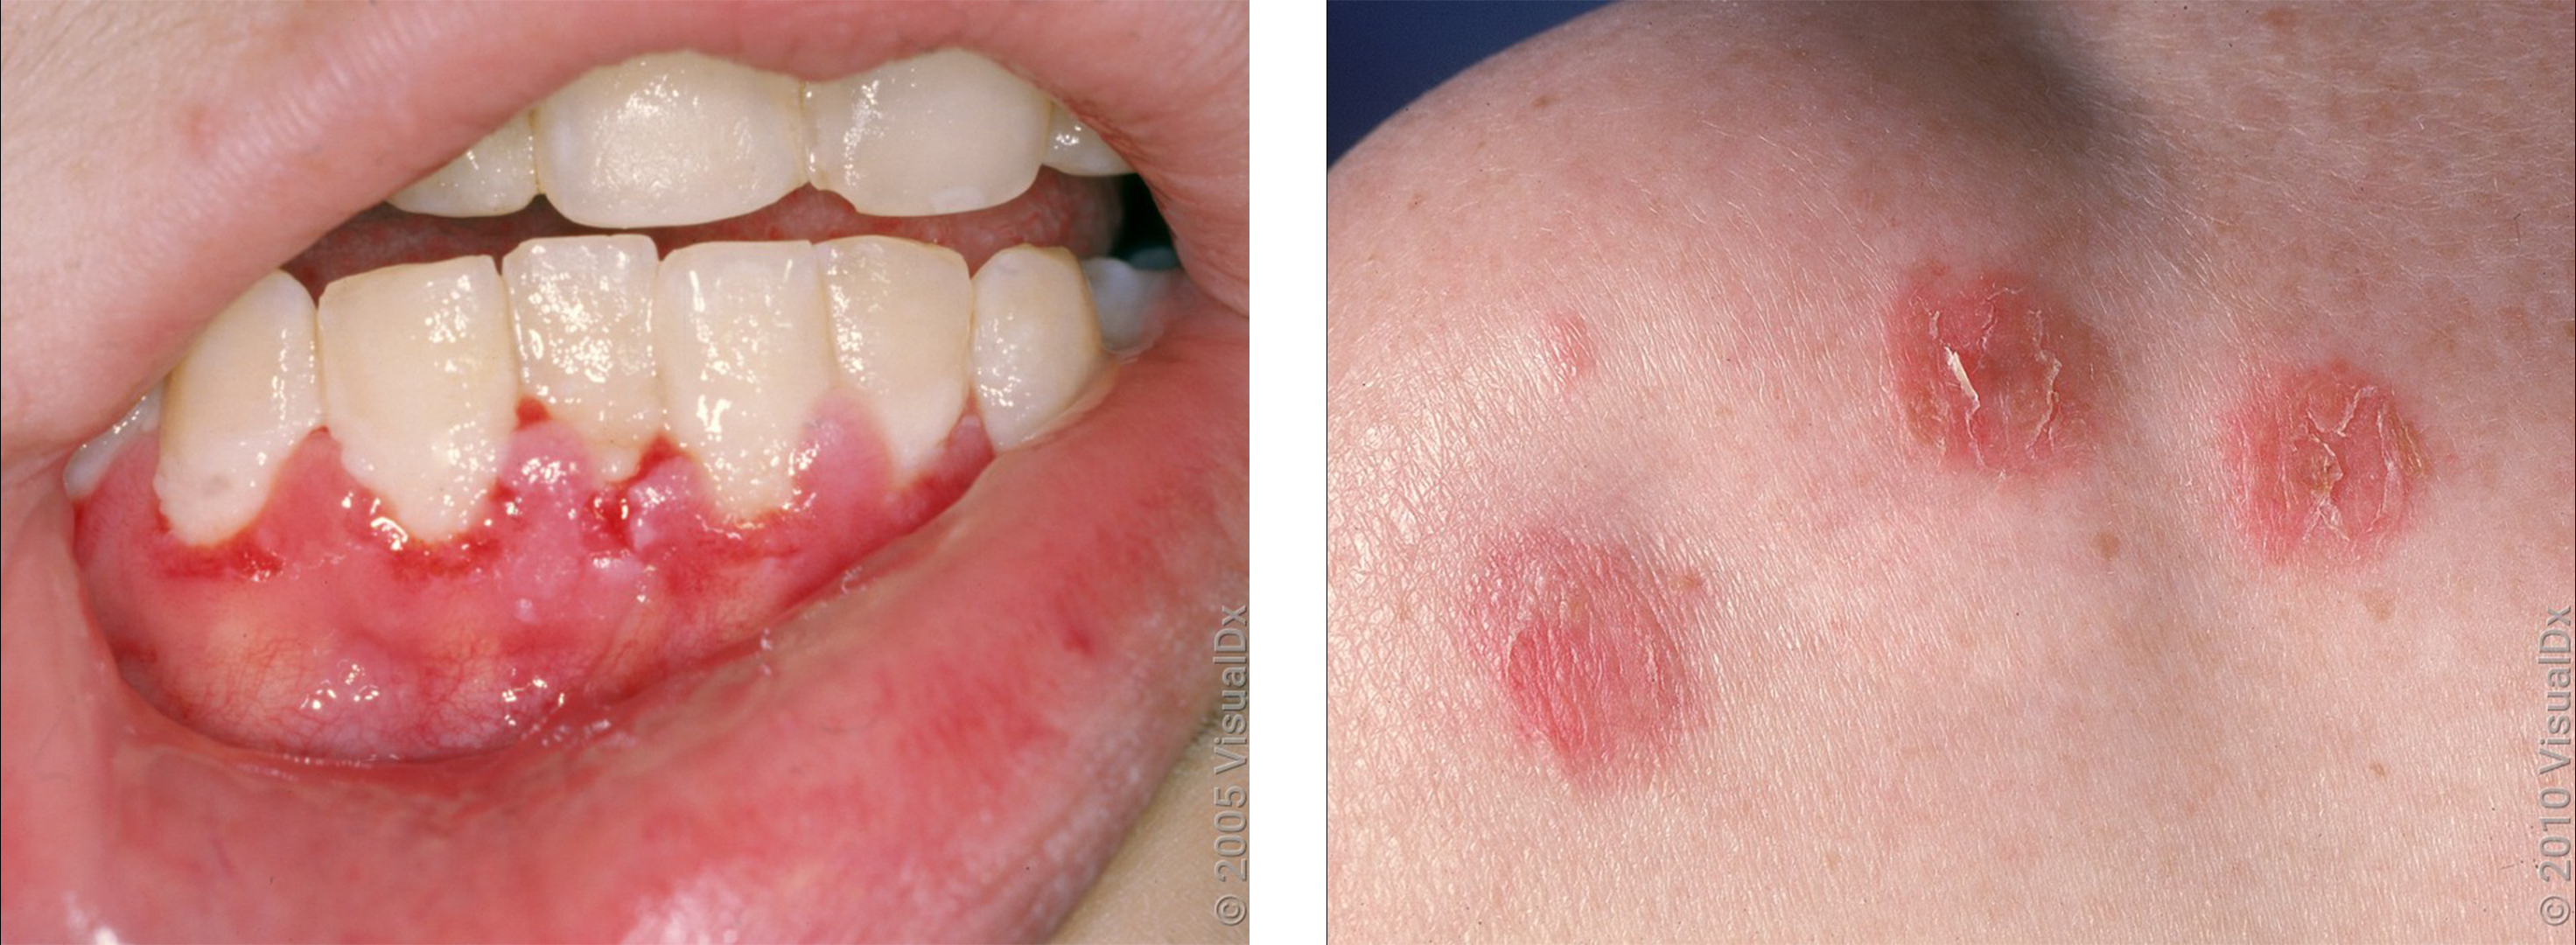 Left: Open sores in the mouth around the gumline in pemphigus. Right: Pink crusty patches  on the shoulder in pemphigus.